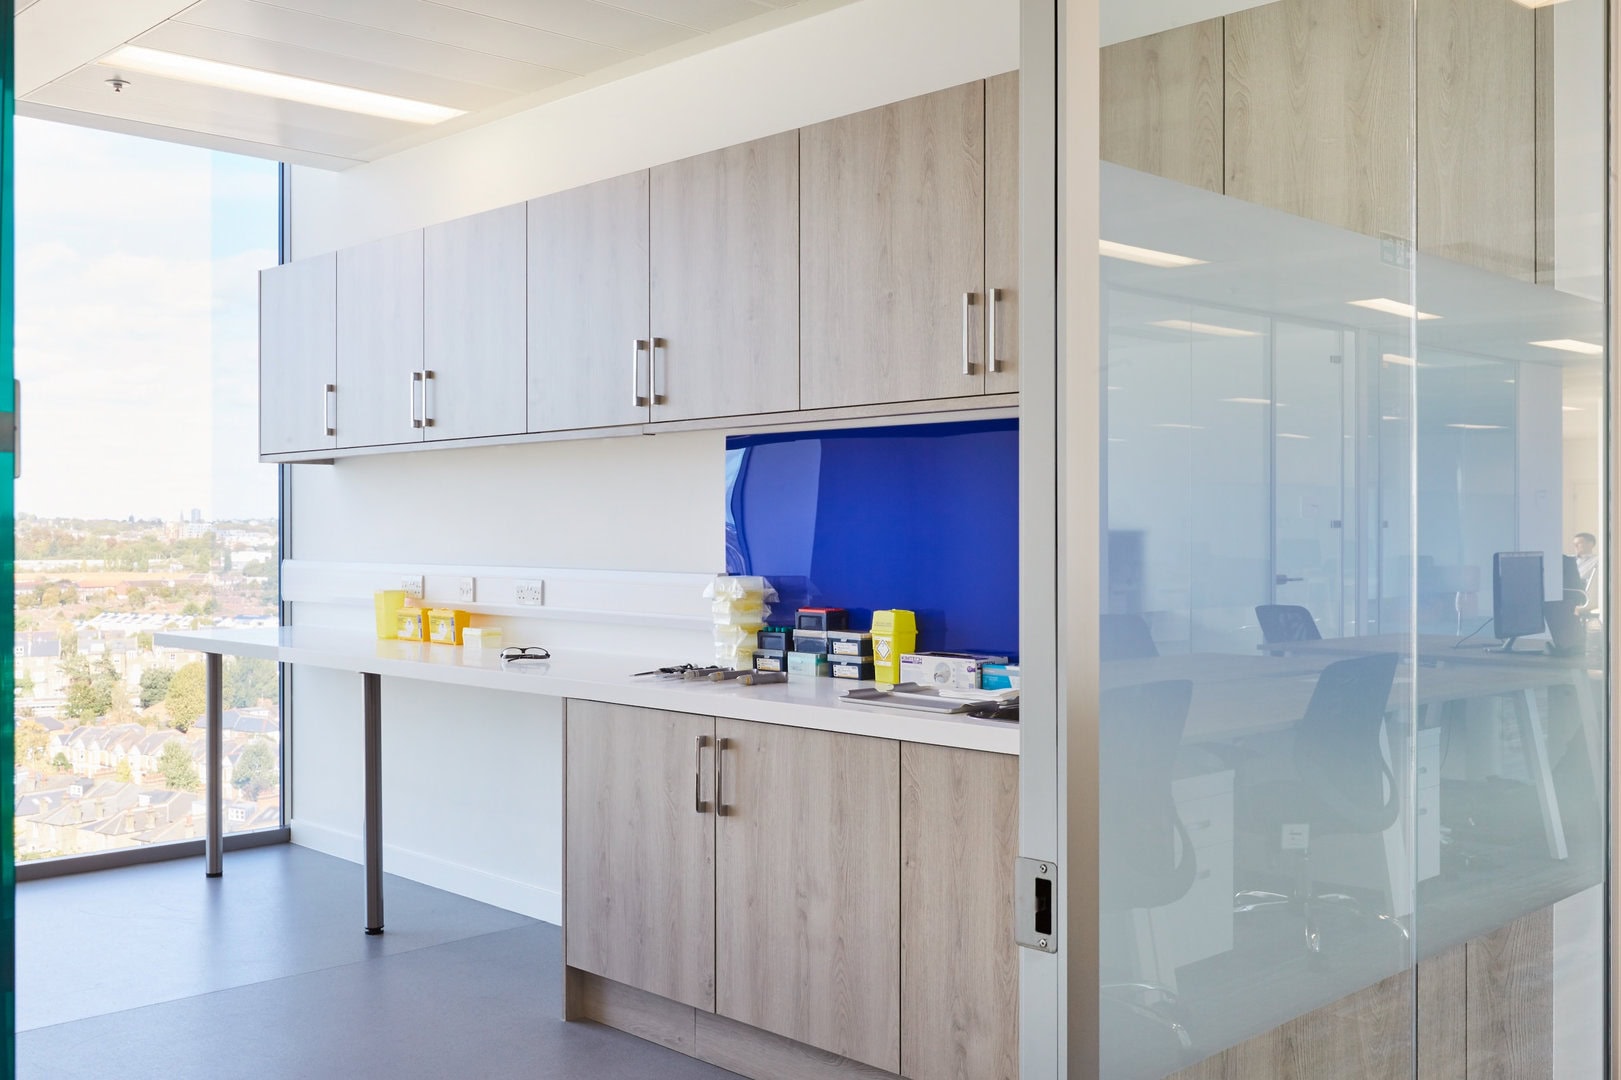 Inside a life sciences workplace design and build project by AIS